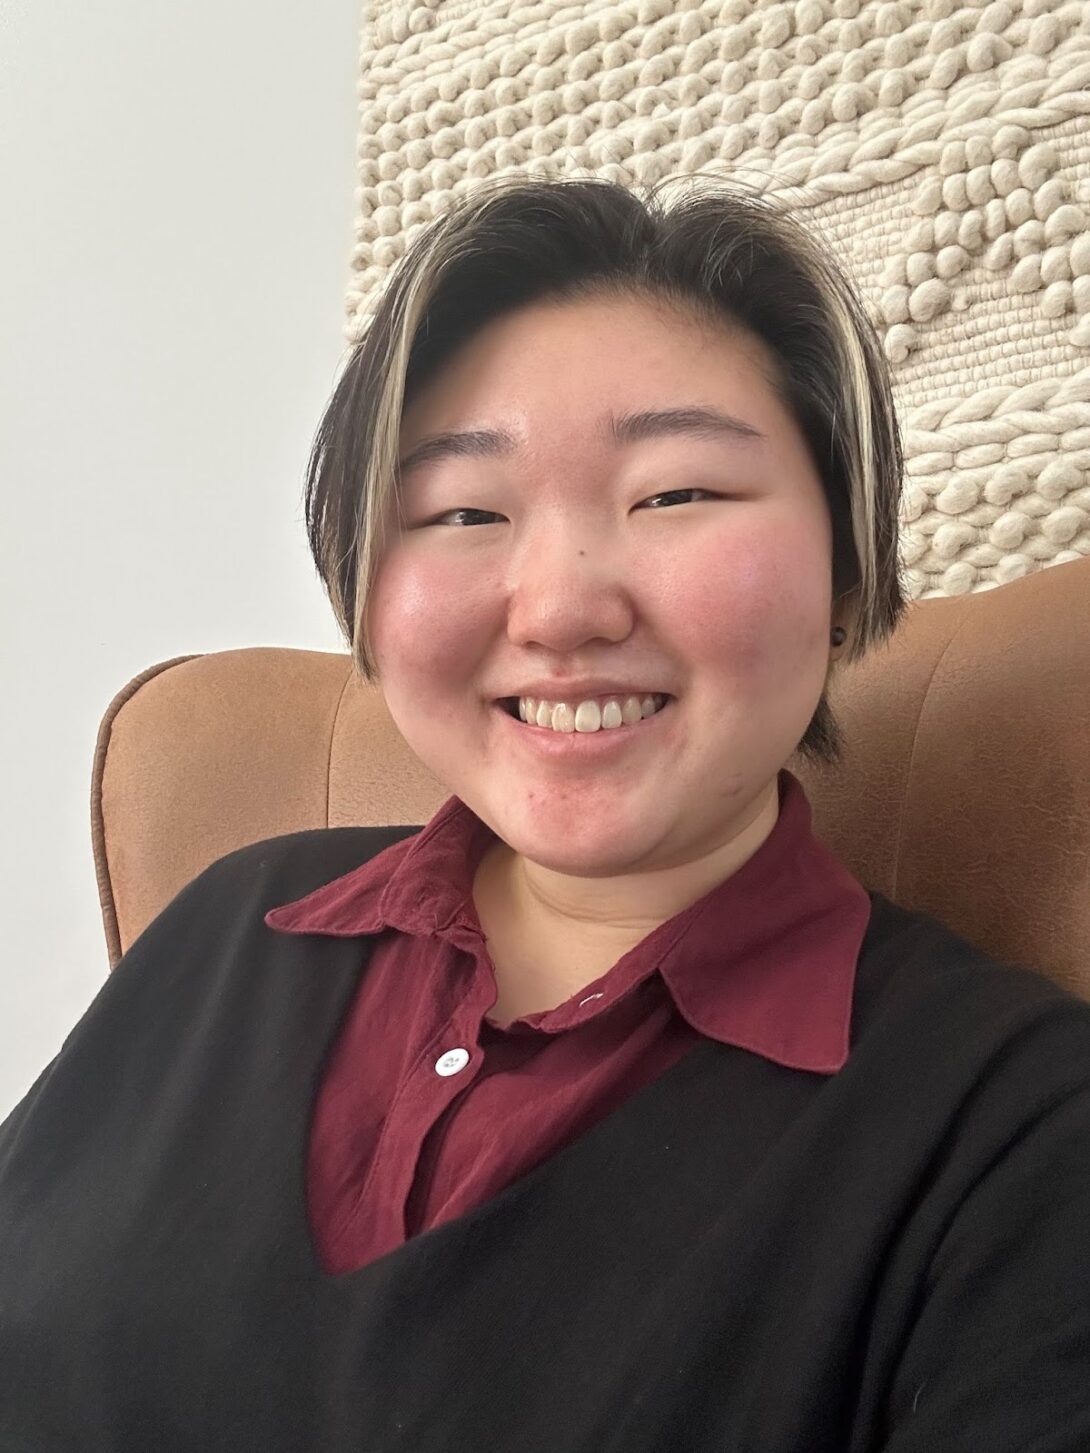 Image Description: a smiling, fair-skinned Korean person with blonde highlights on black, short hair.  They are wearing a maroon collared shirt underneath a black v-neck sweater, with a light brown chair and white knit wall piece in the background.